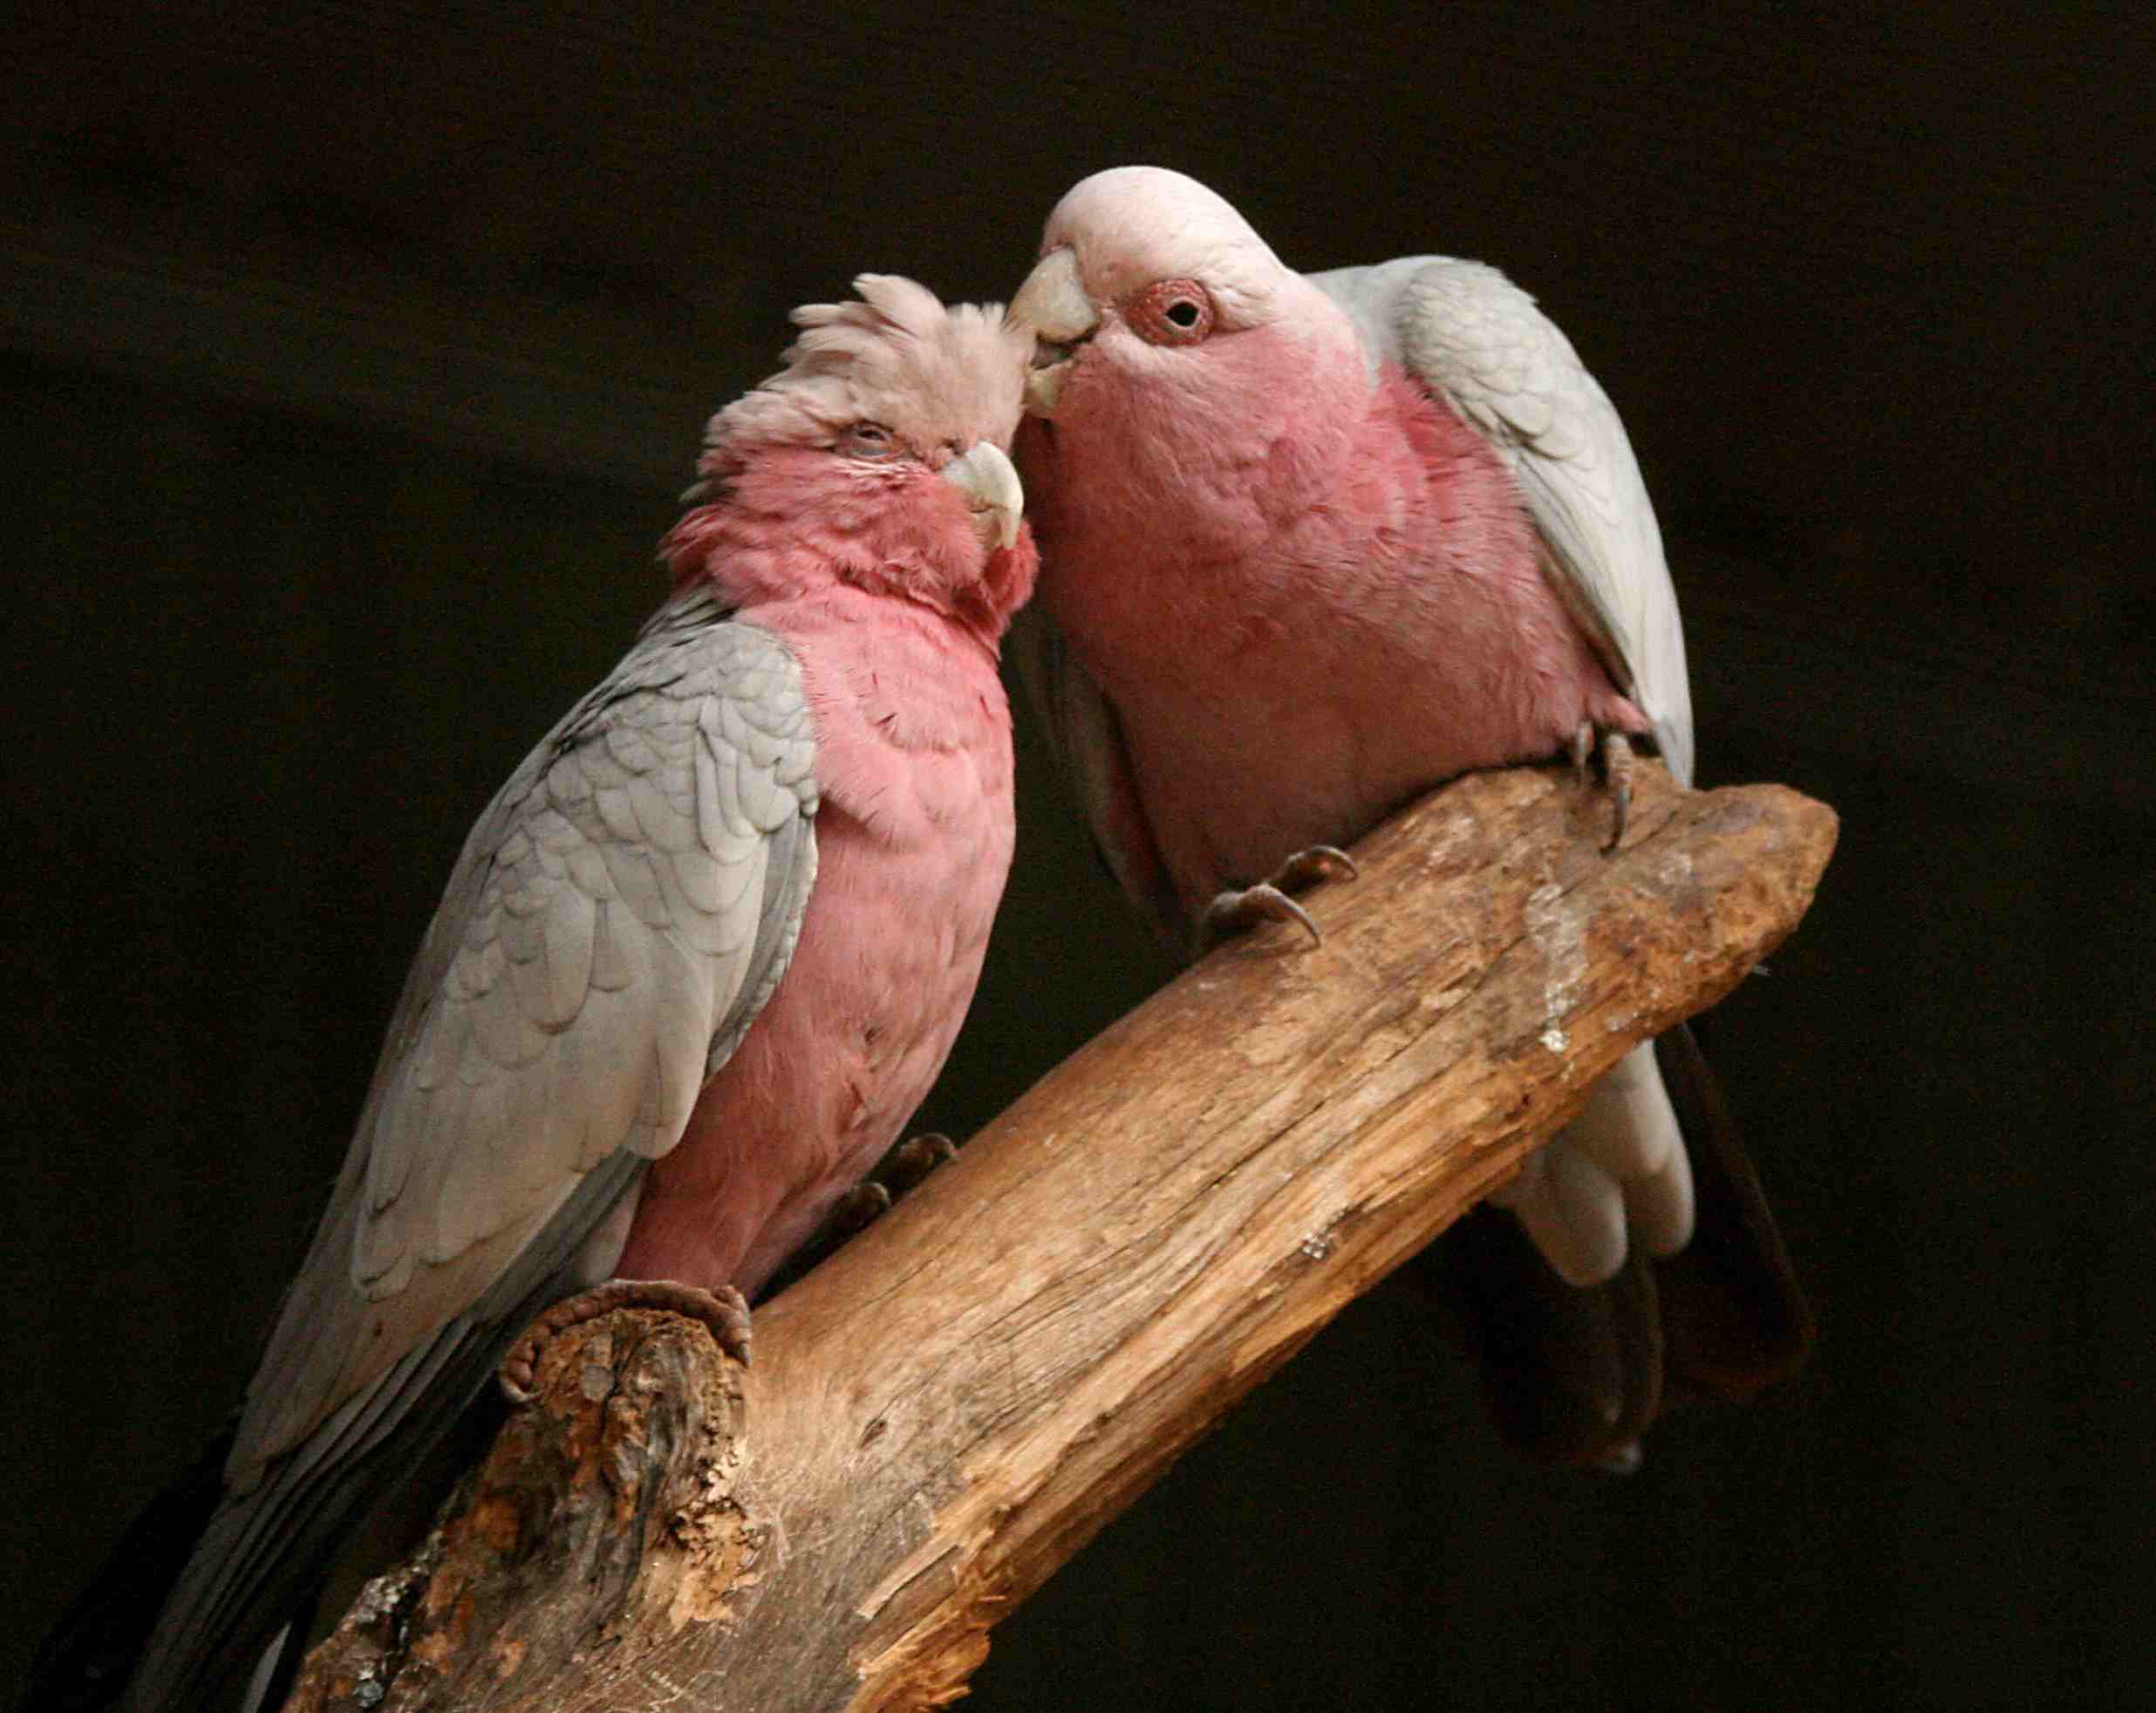 A pair of rose-breasted cockatoos on a branch